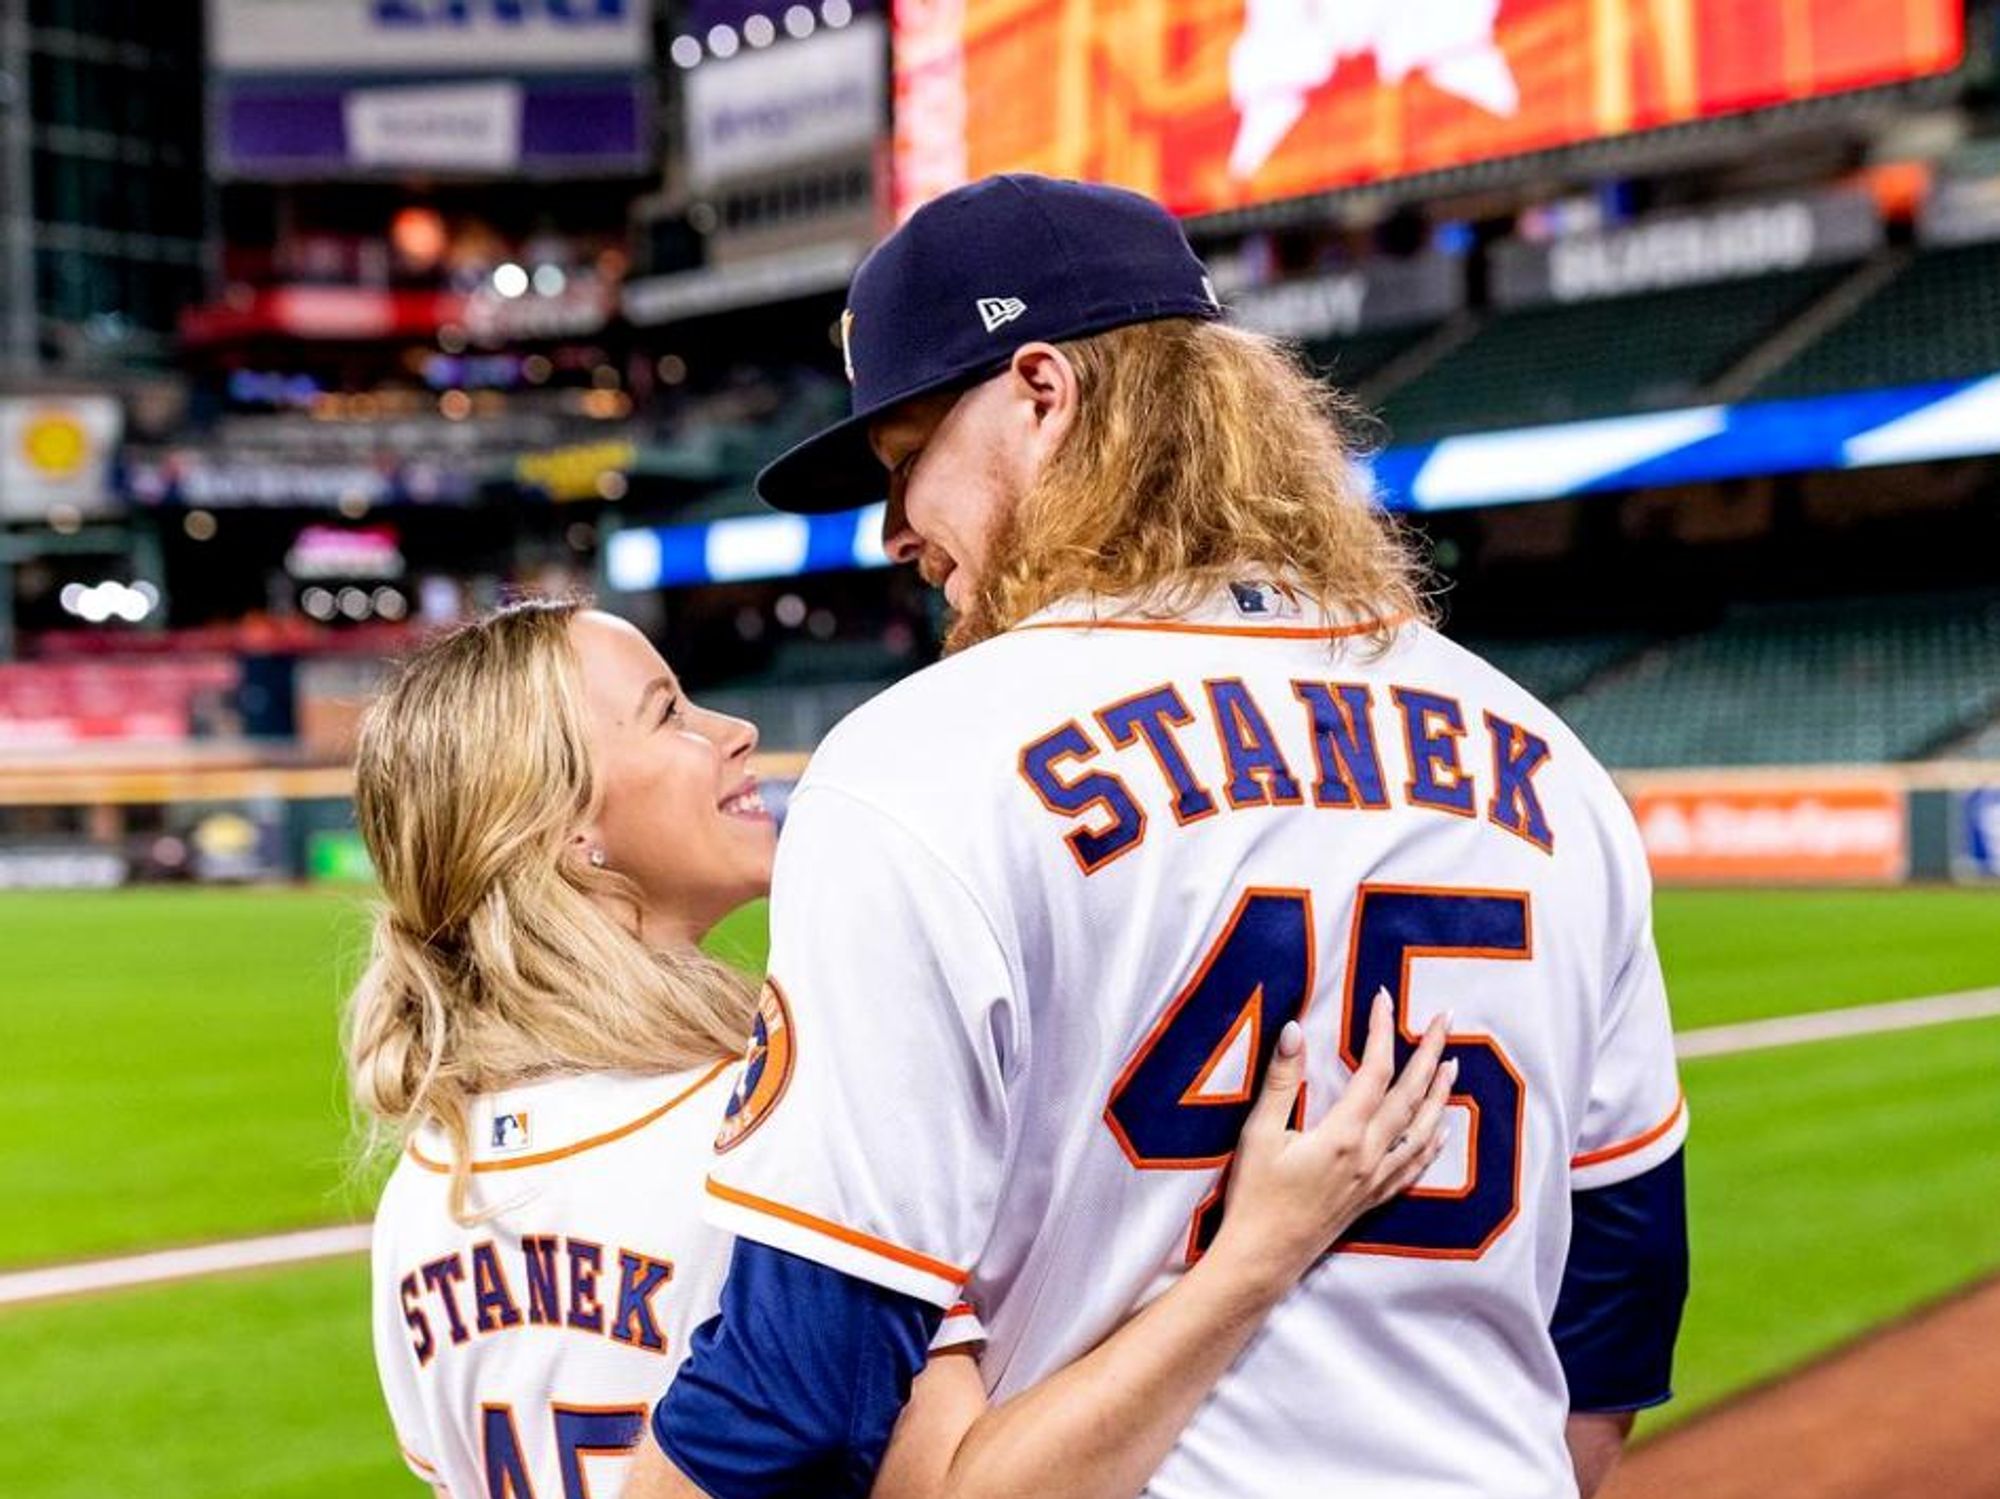 Houston Astros pitcher ties the knot with longtime partner in post